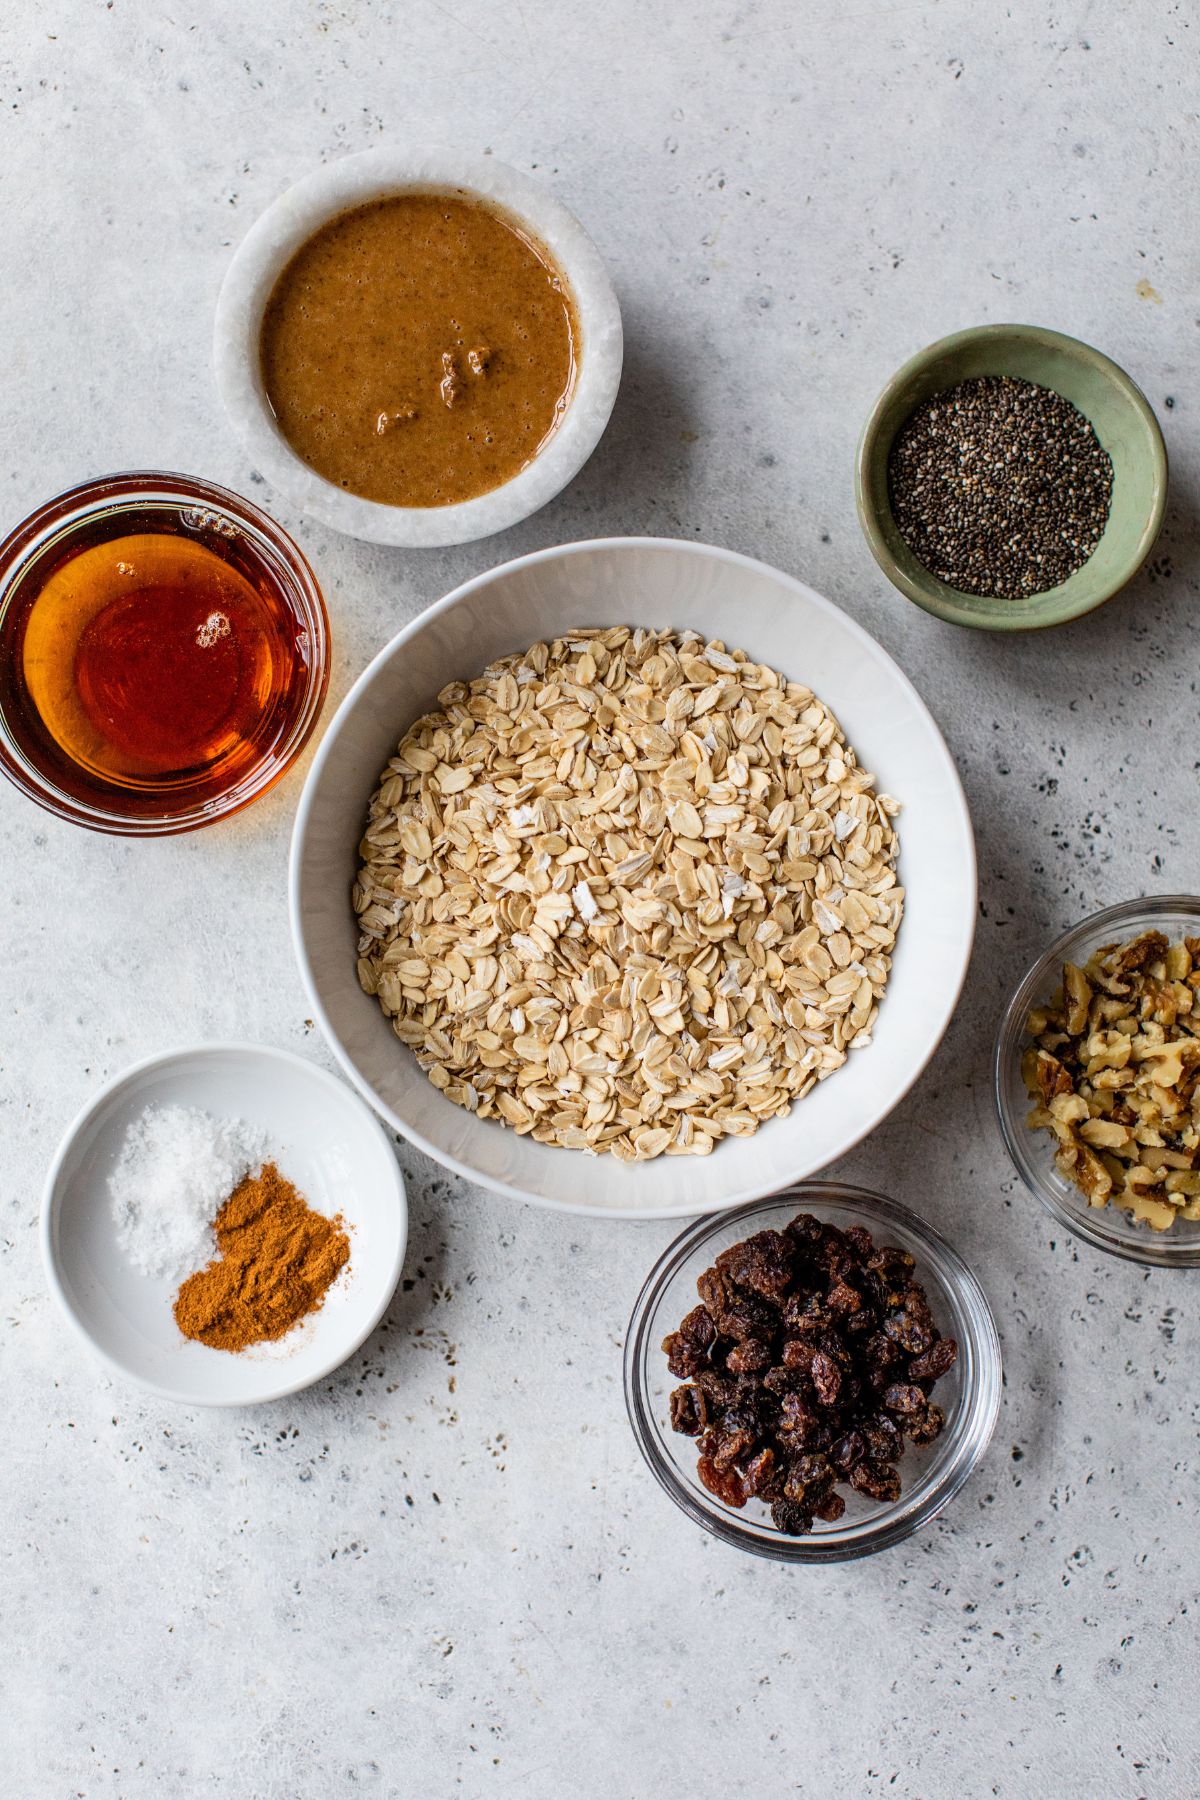 Ingredients for making oatmeal energy balls divided into small bowls.